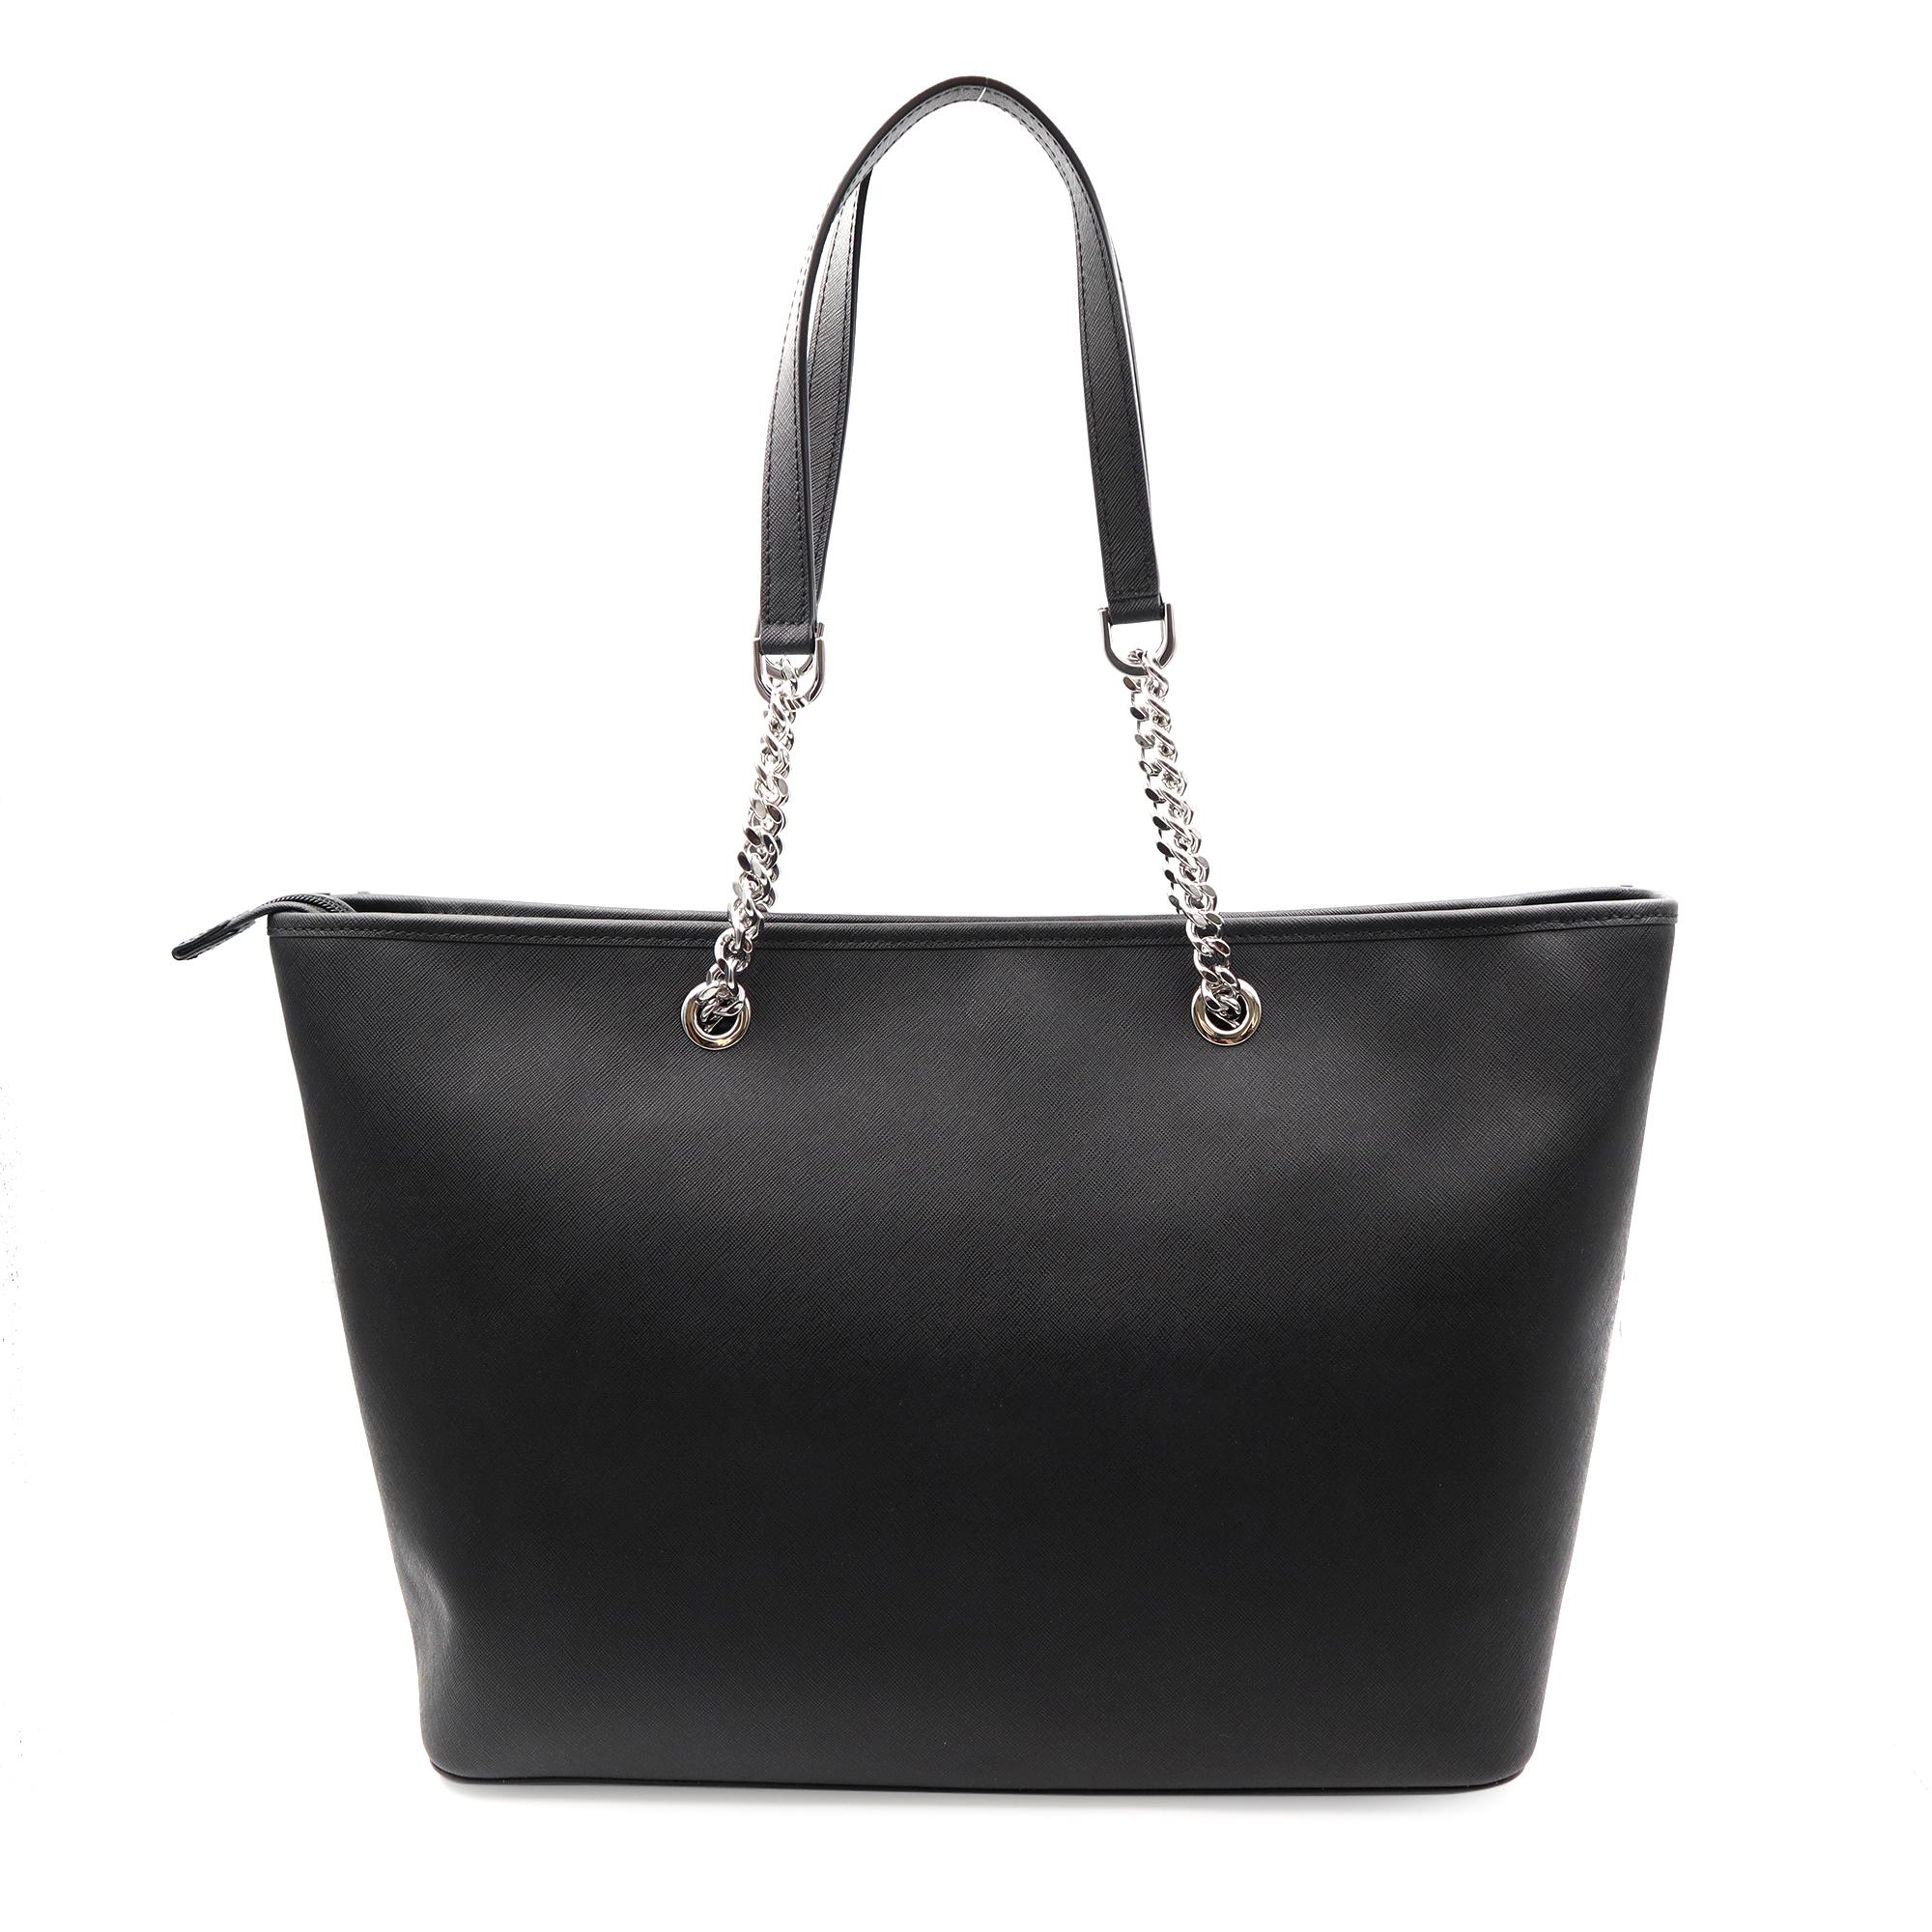 A Michael Kors Jet Set tote crafted in saffiano leather with silver-tone hardware and a fully lined interior. This Michael Kors Jet Set tote features two main zip pockets, a center zip pocket and interior wall pockets; two chain leather handles with